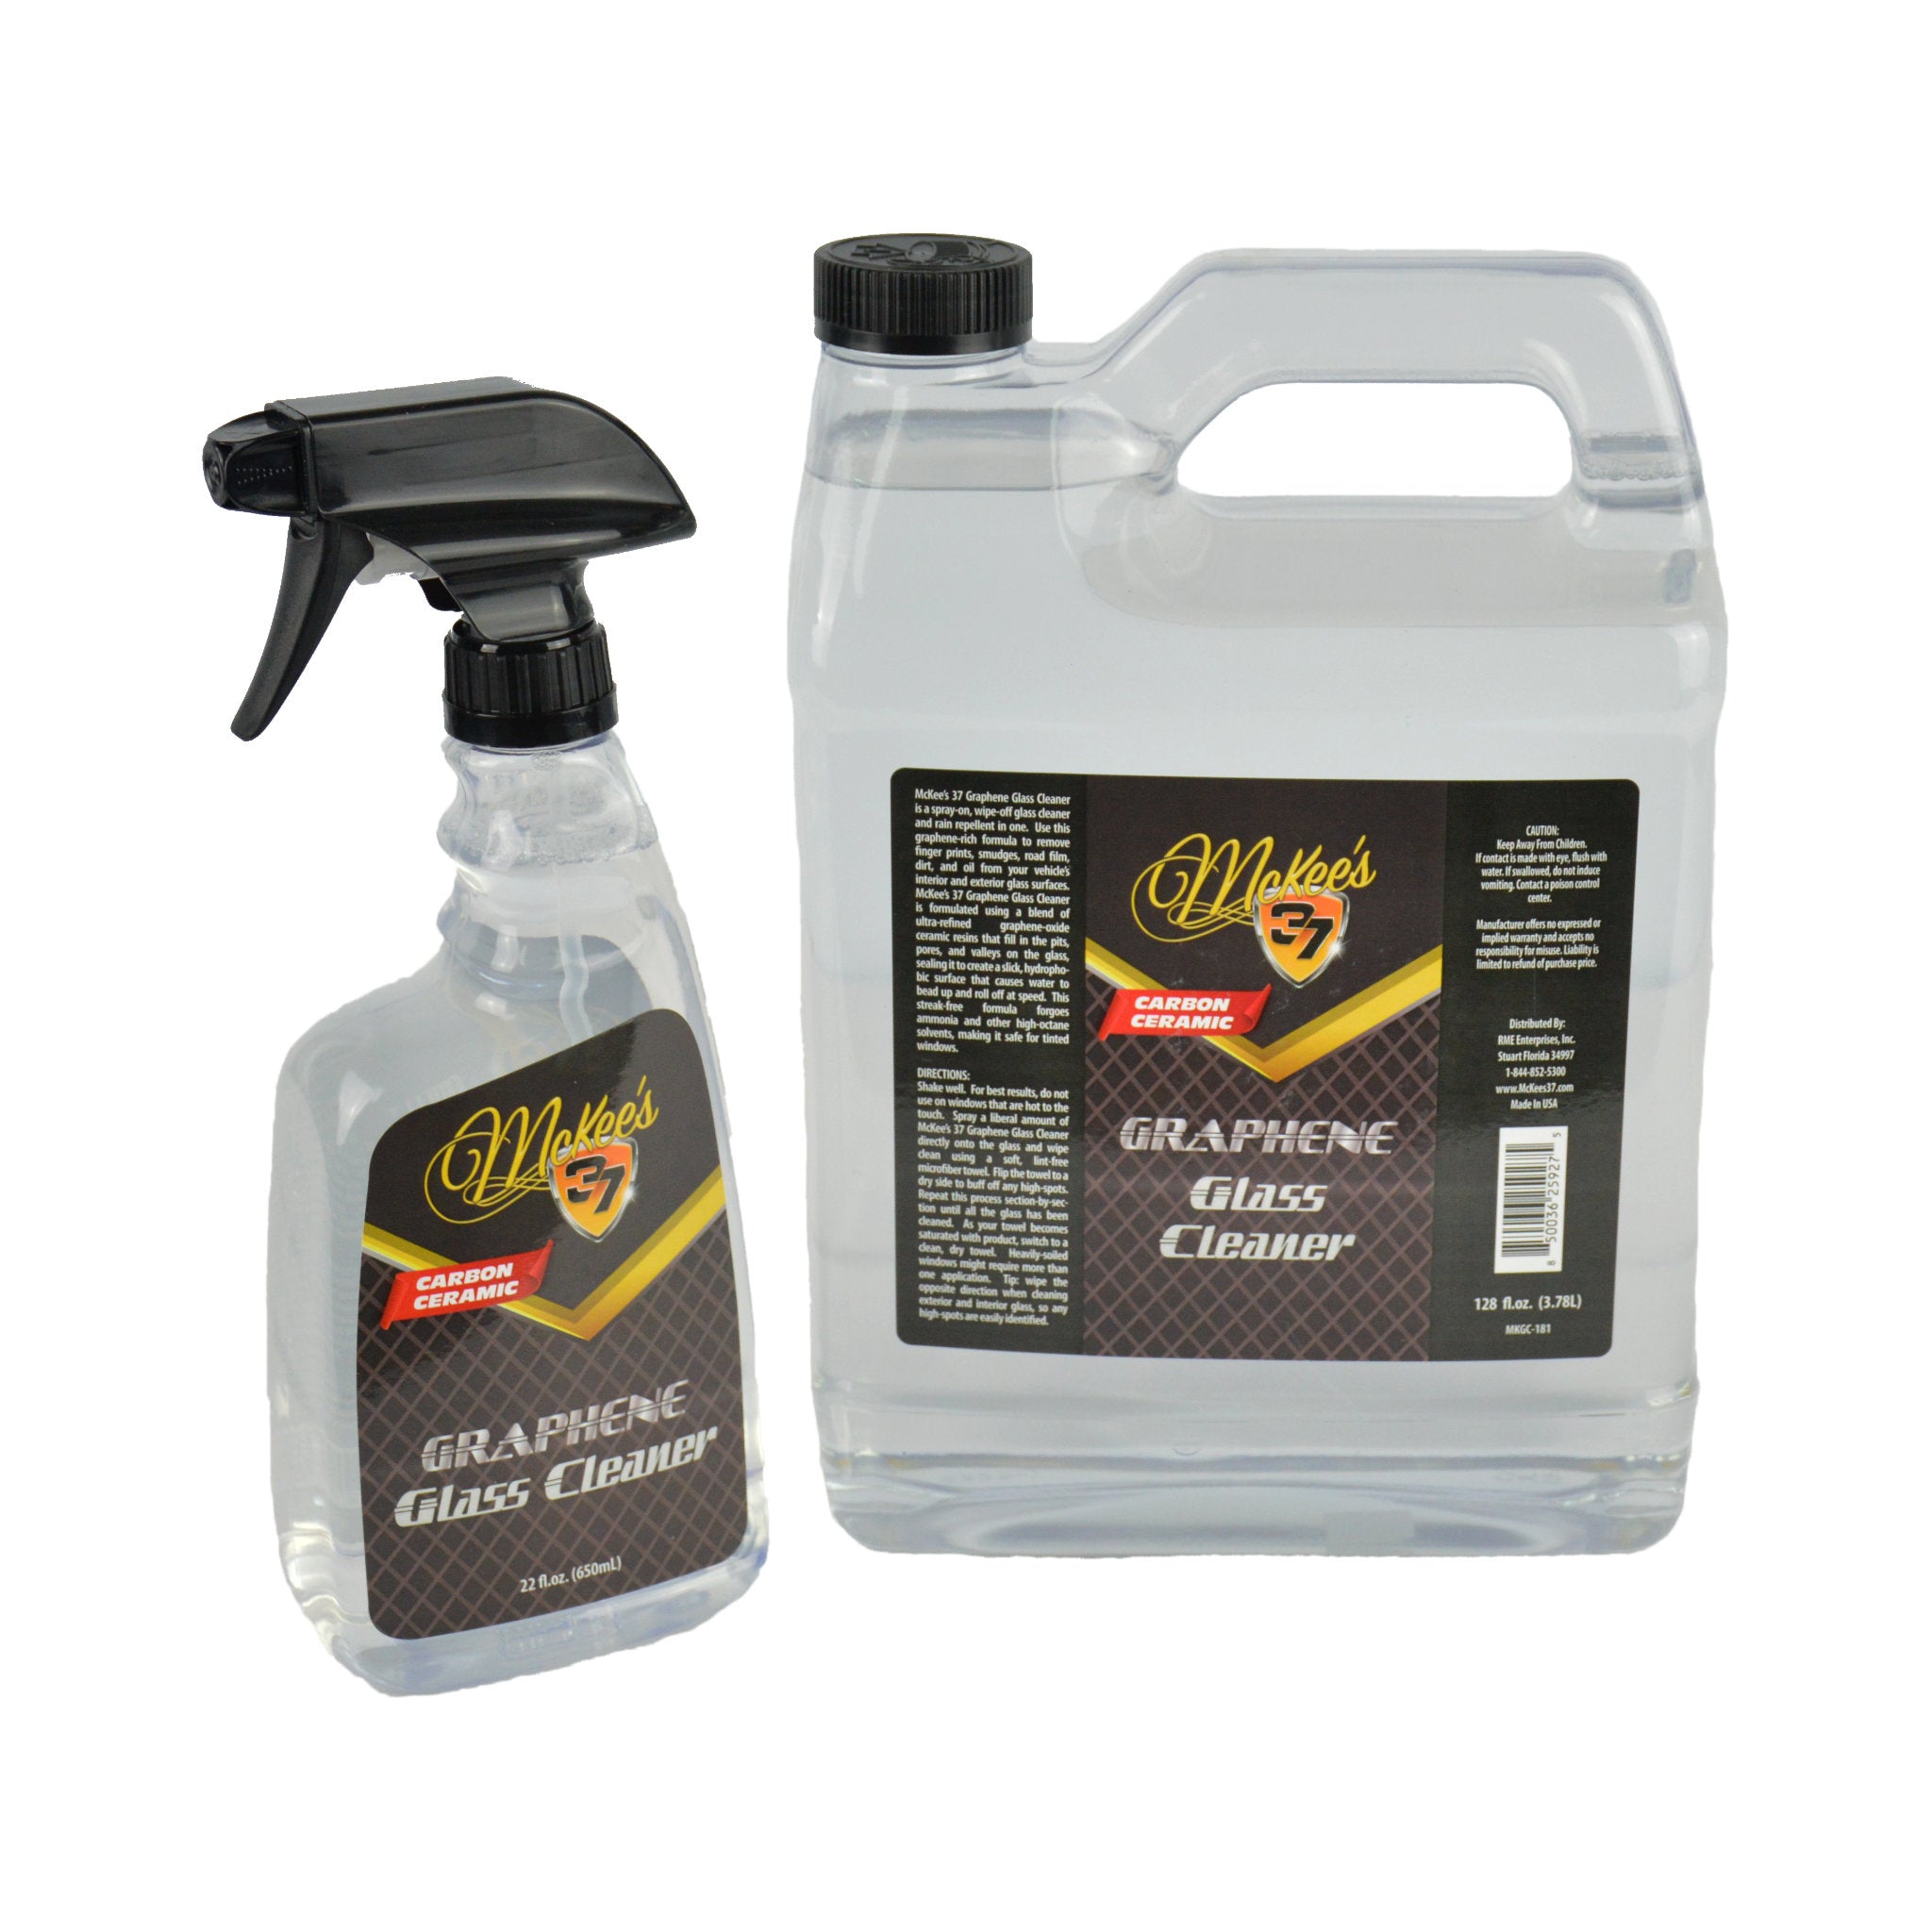 Areas On A Car To Keep Car Degreaser Away From